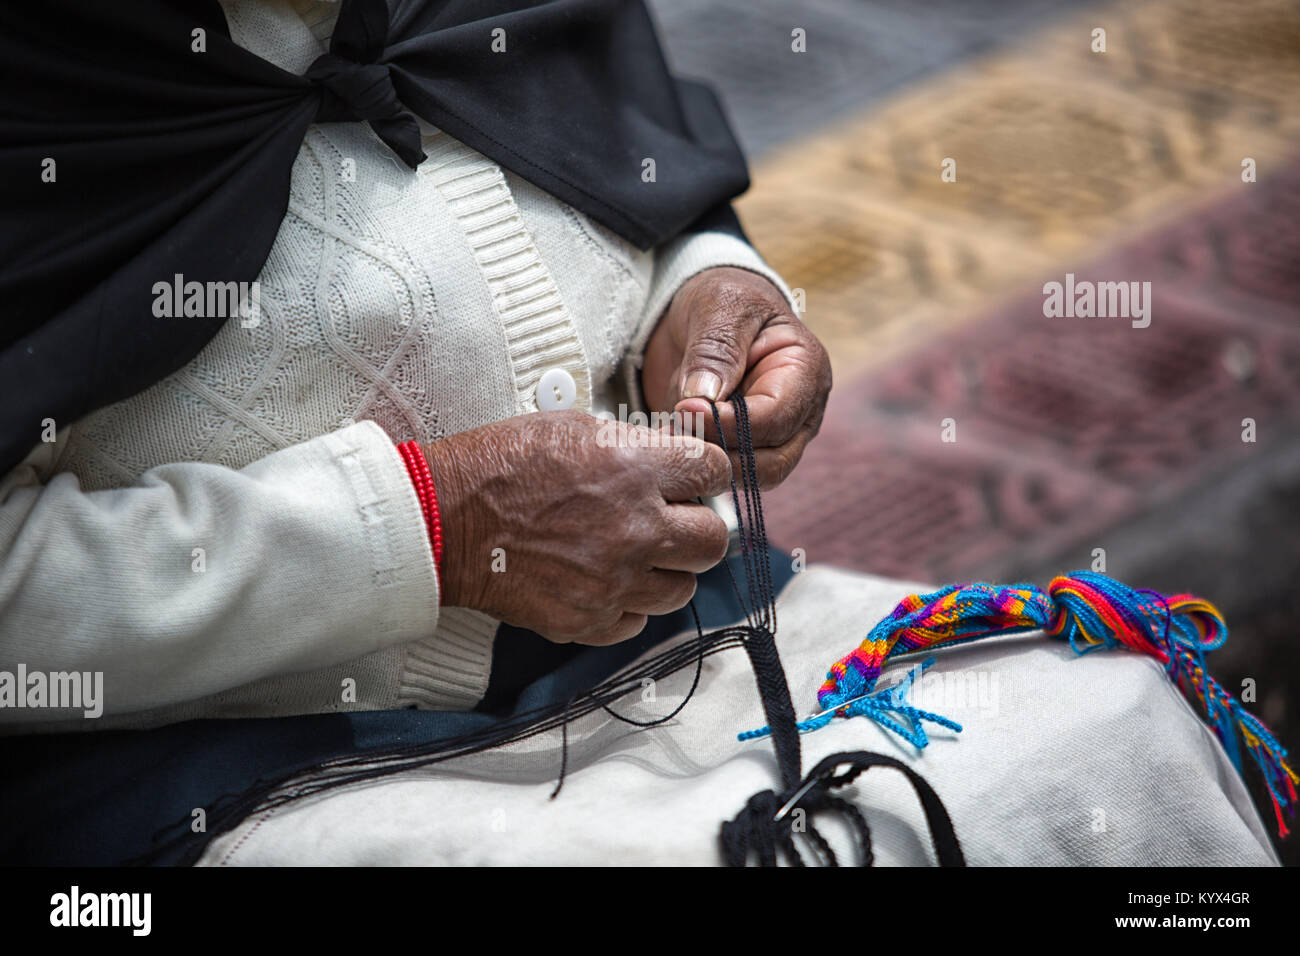 Otavalo, Ecuador - December 30, 2017: closeup of the hands an indigenous woman working on an artisan knotted souvenir in the local market Stock Photo